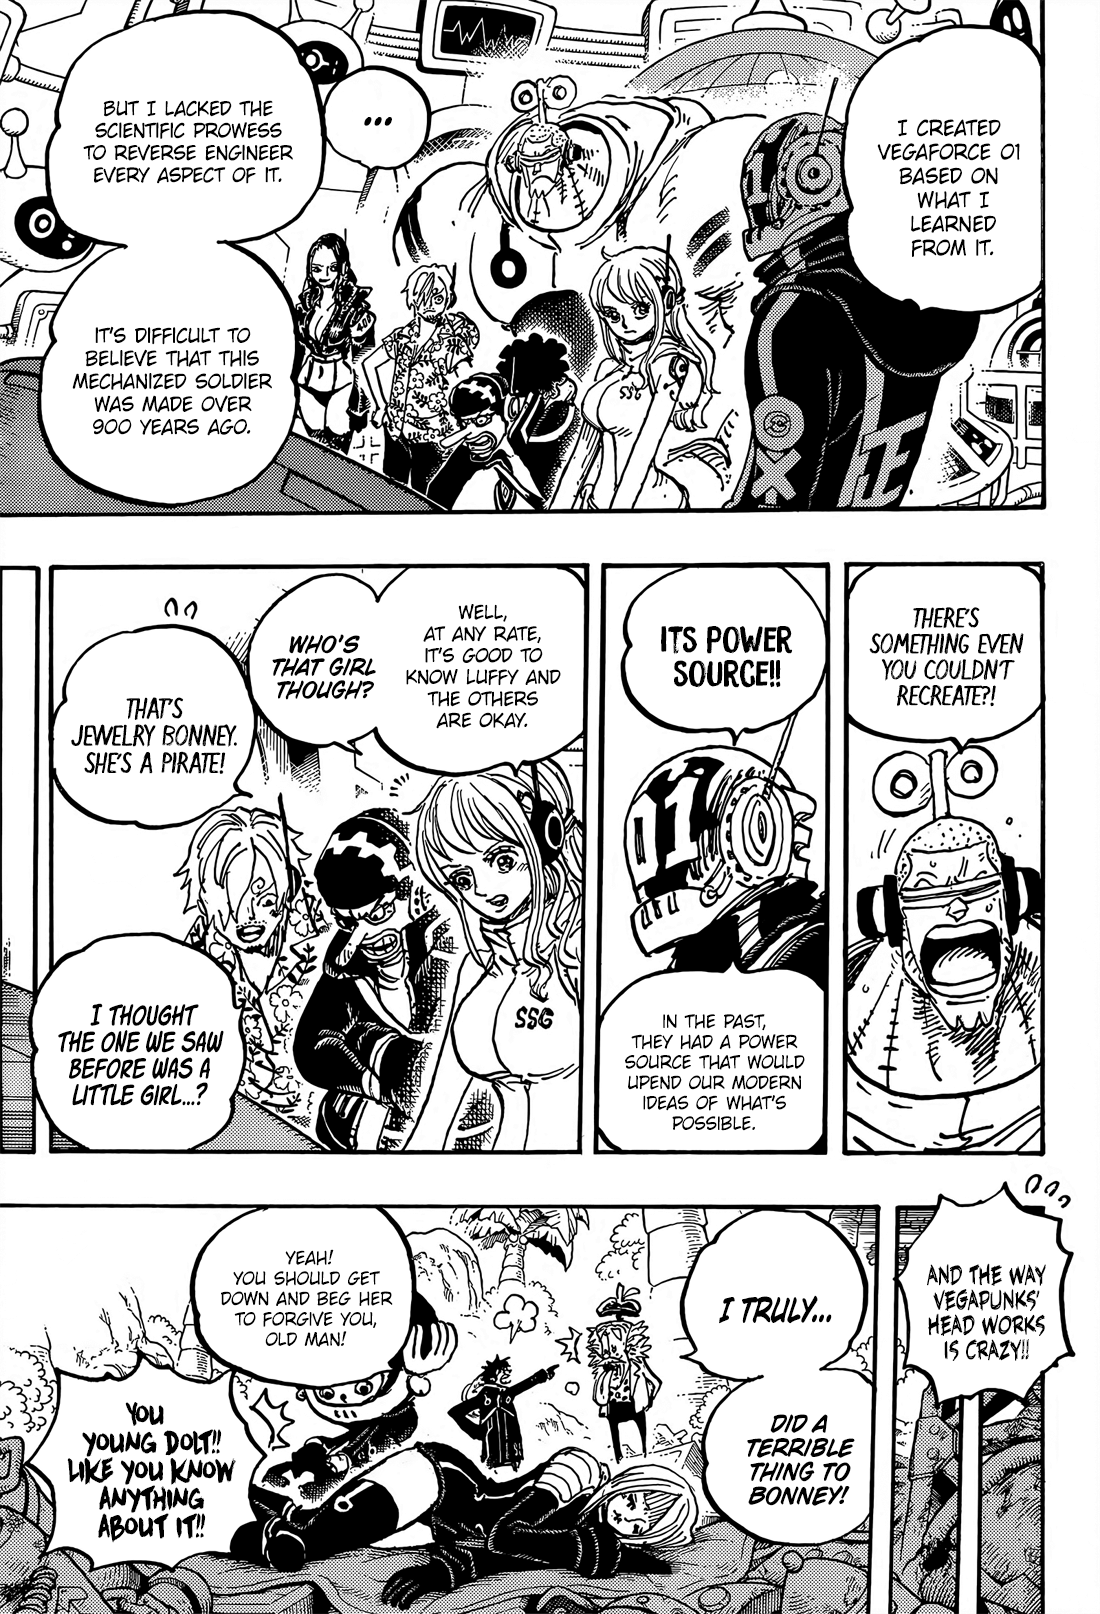 One Piece, Chapter 1067  TcbScans Org - Free Manga Online in High